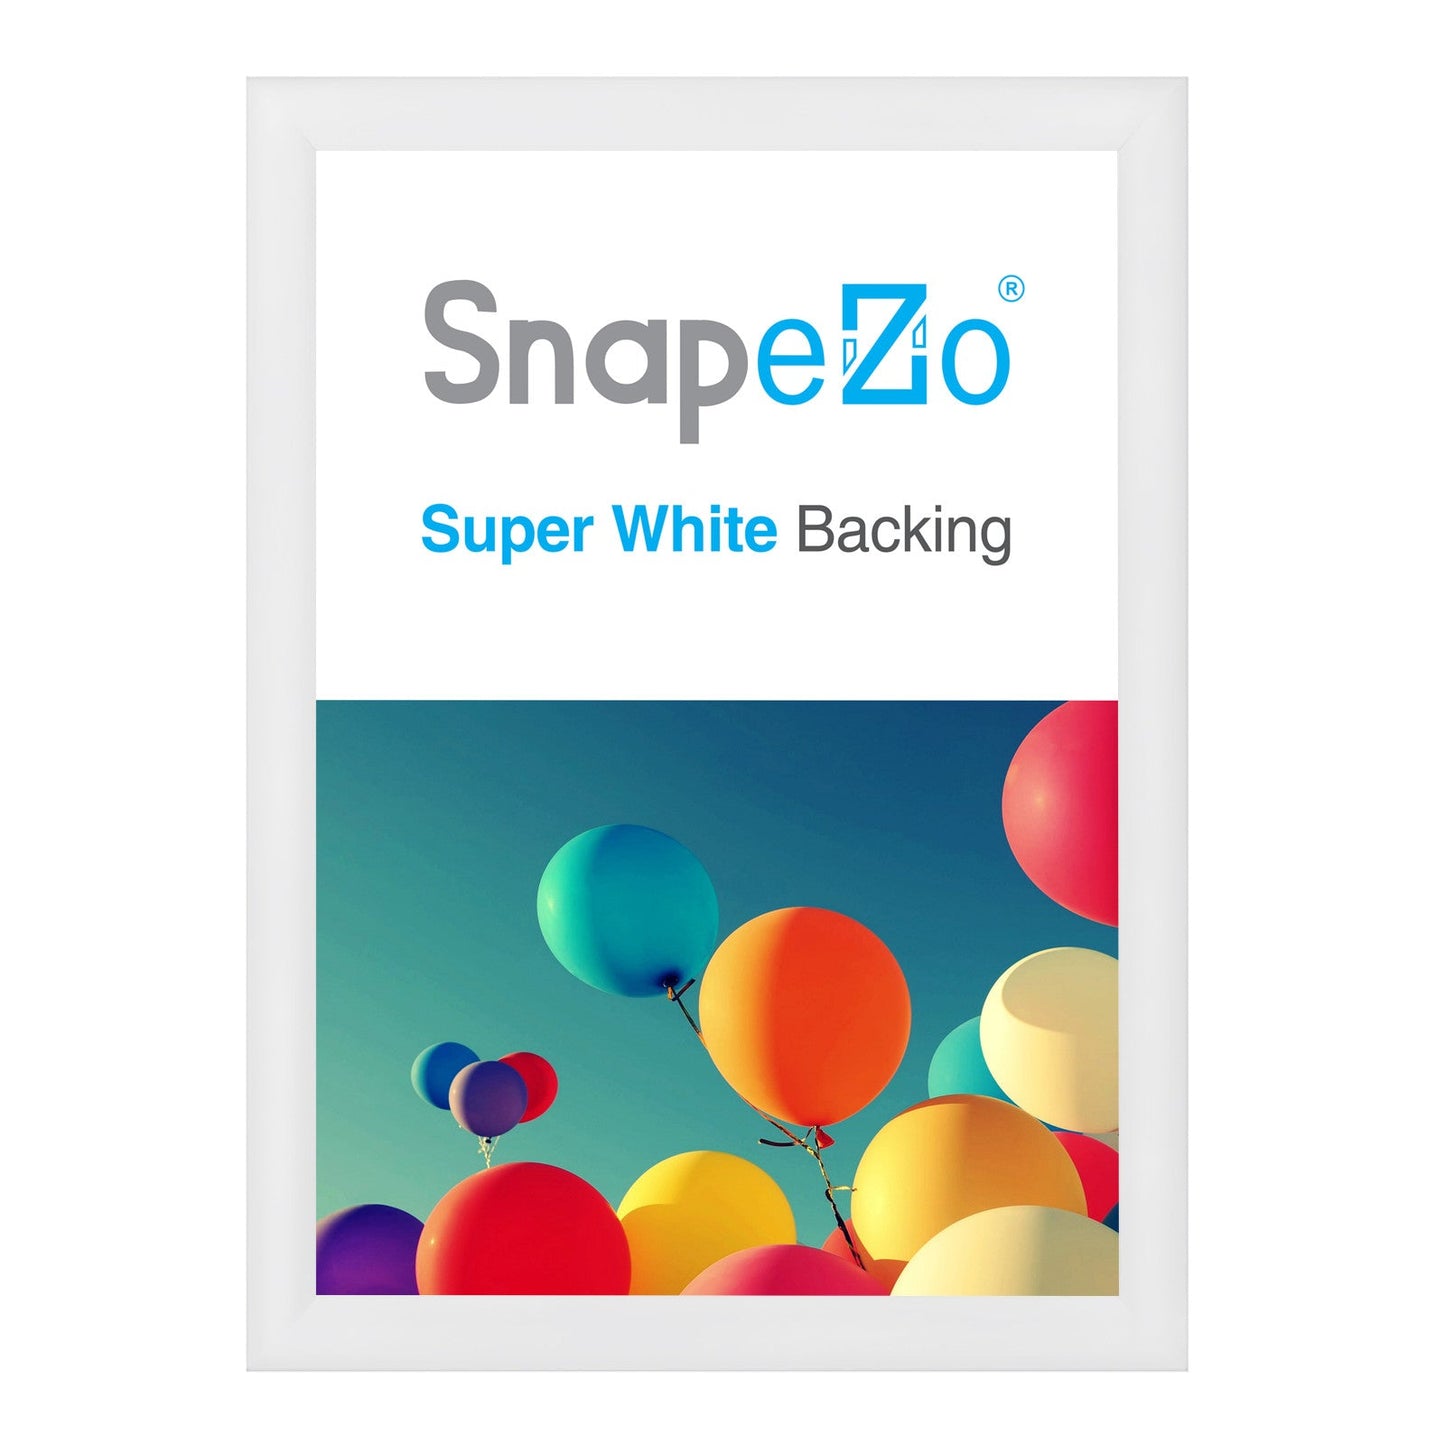 Load image into Gallery viewer, 27x39 White SnapeZo® Snap Frame - 1.2&amp;quot; Profile
